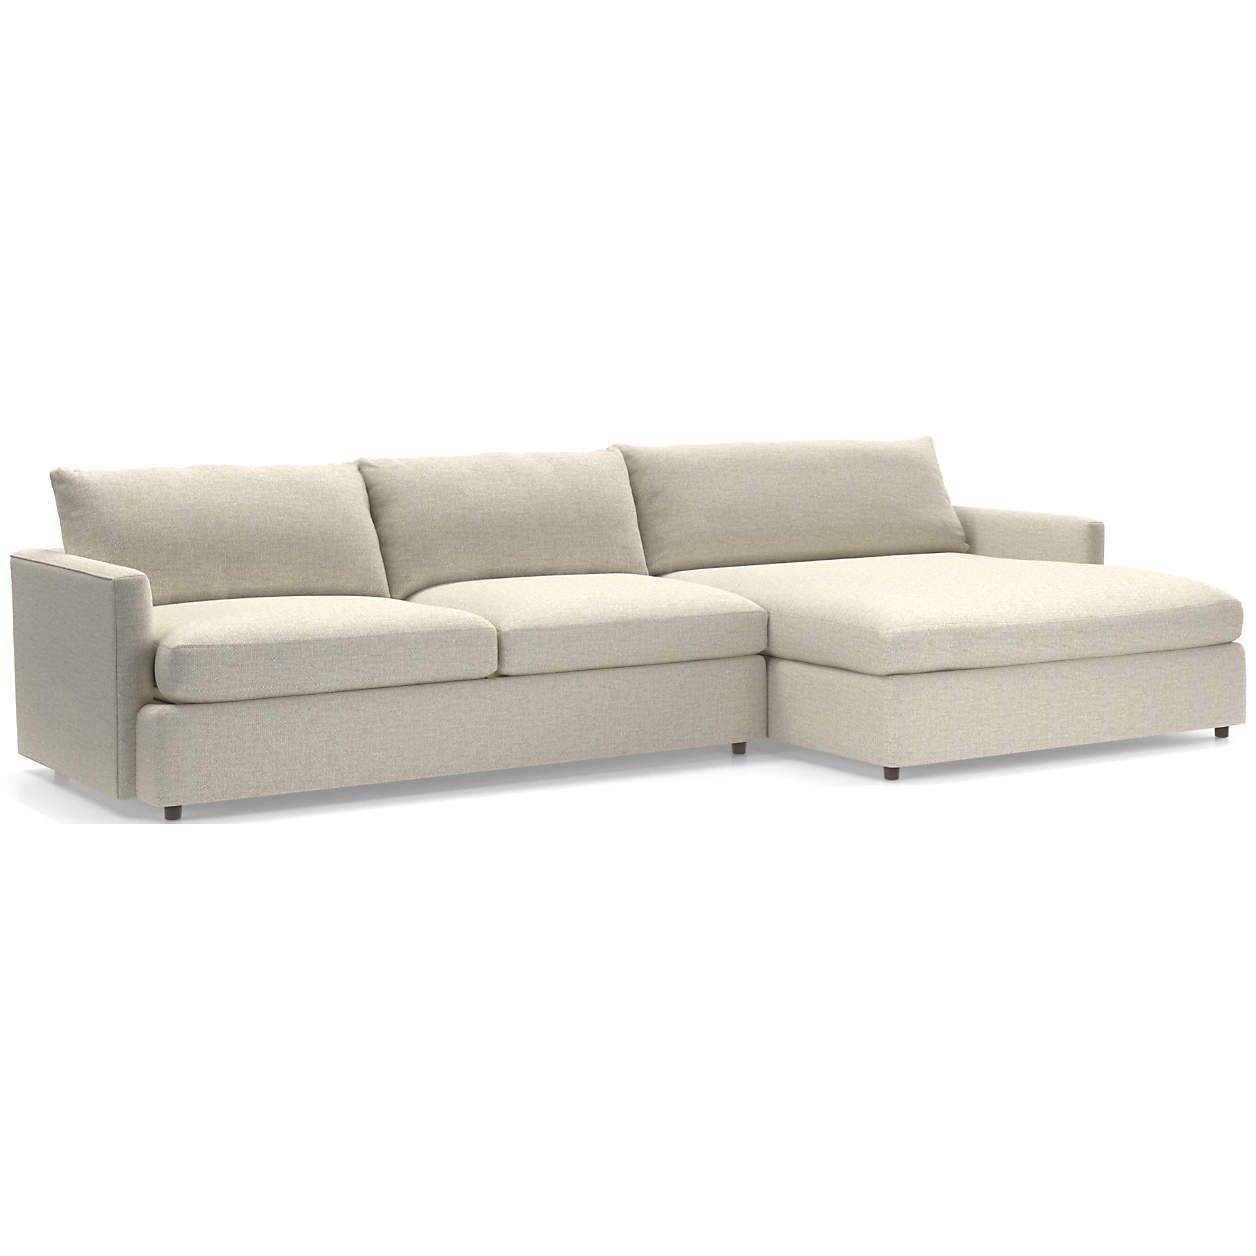 Lounge II Petite 2-Piece Right Arm Double Chaise Sectional Sofa + Reviews | Crate and Barrel | Crate & Barrel